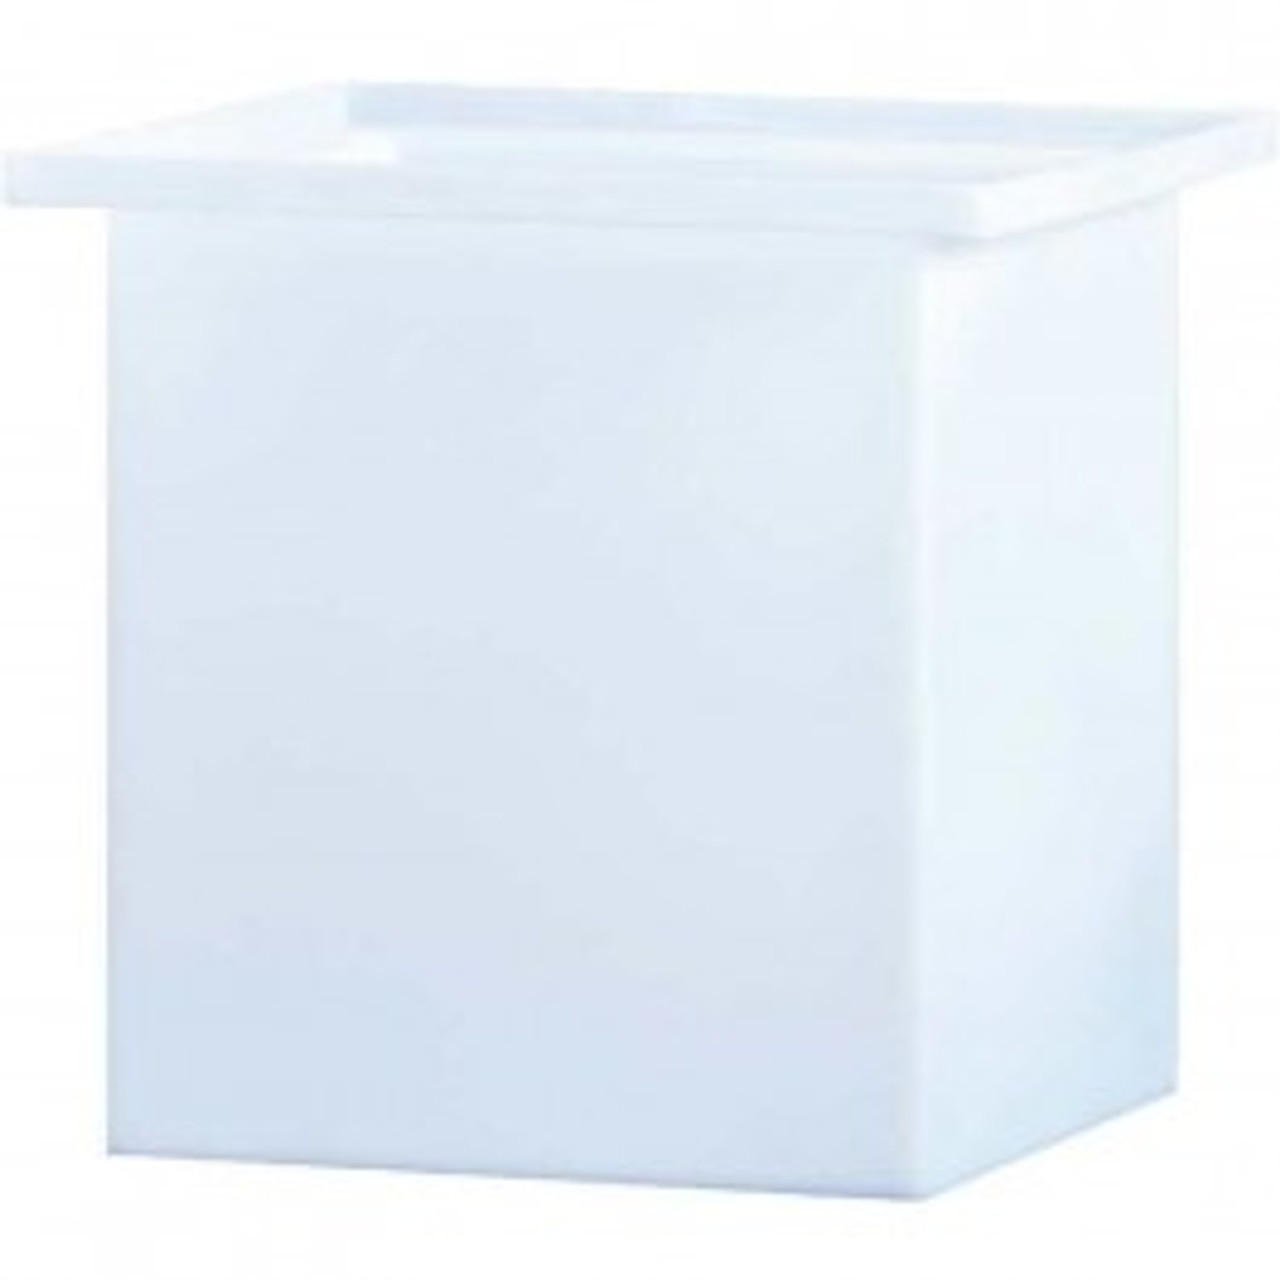 An image of a 37 Gallon PE Chem-Tainer White Rectangular Open Top Tank | R182418A